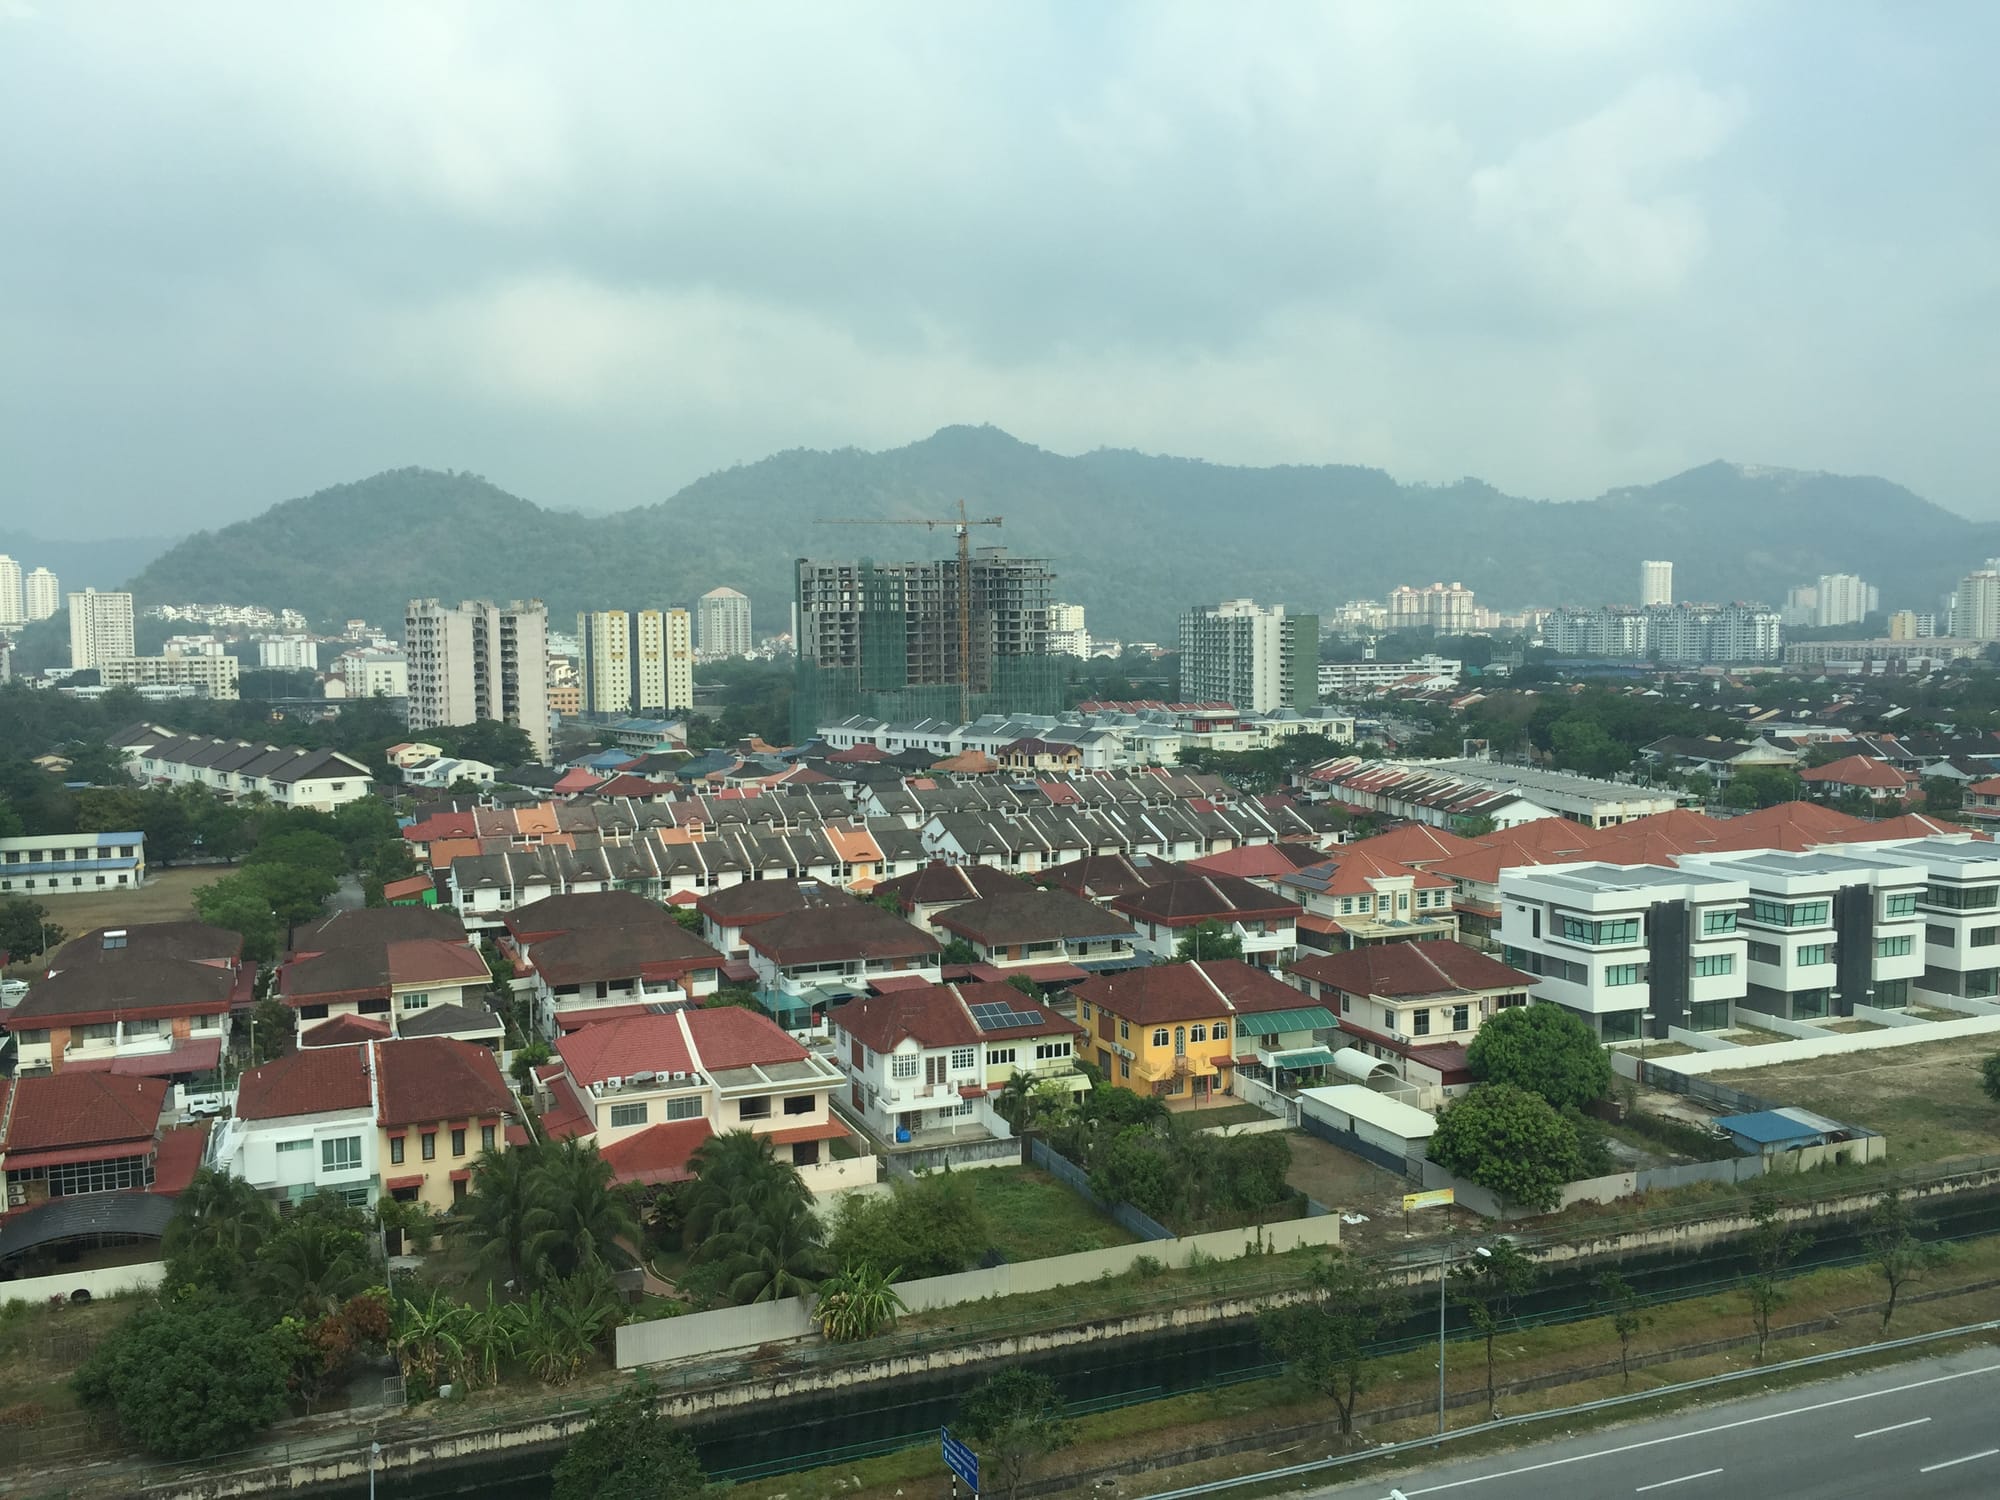 Photo by Author — the view from my room at the Eastin Hotel, Bayan Lepas, Penang, Malaysia